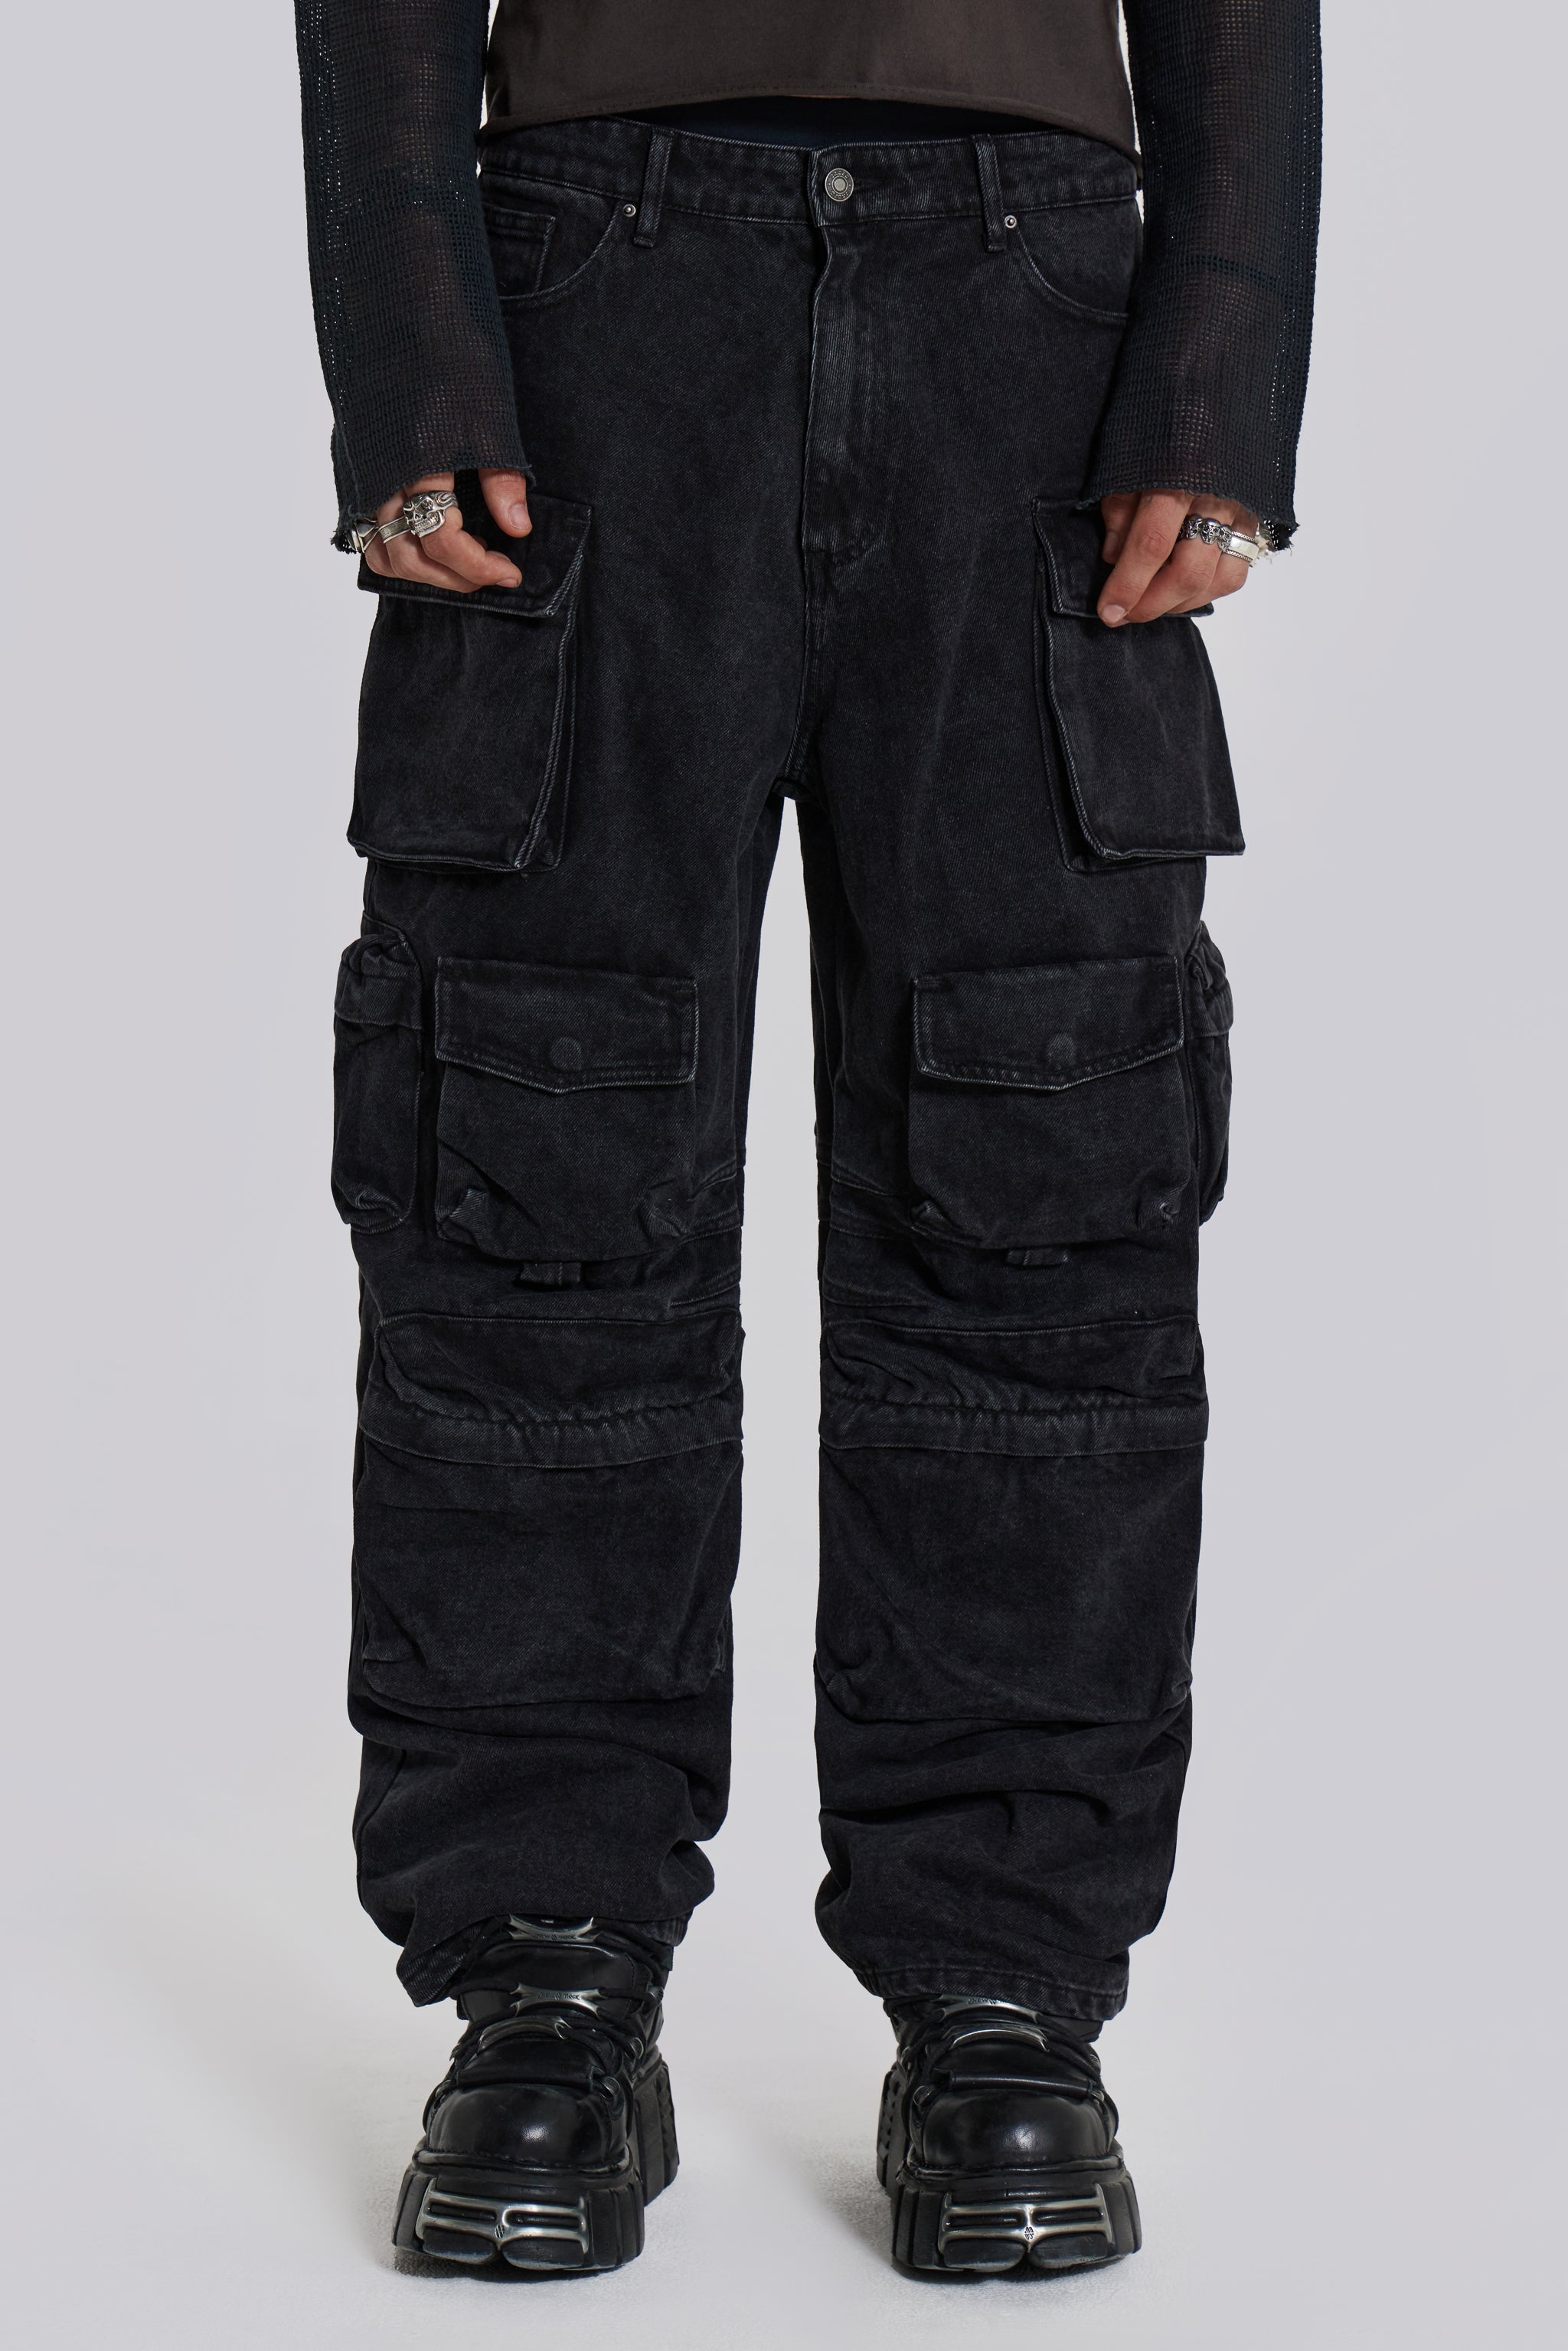 Jaded London Pants Review + Sizing Guide. 